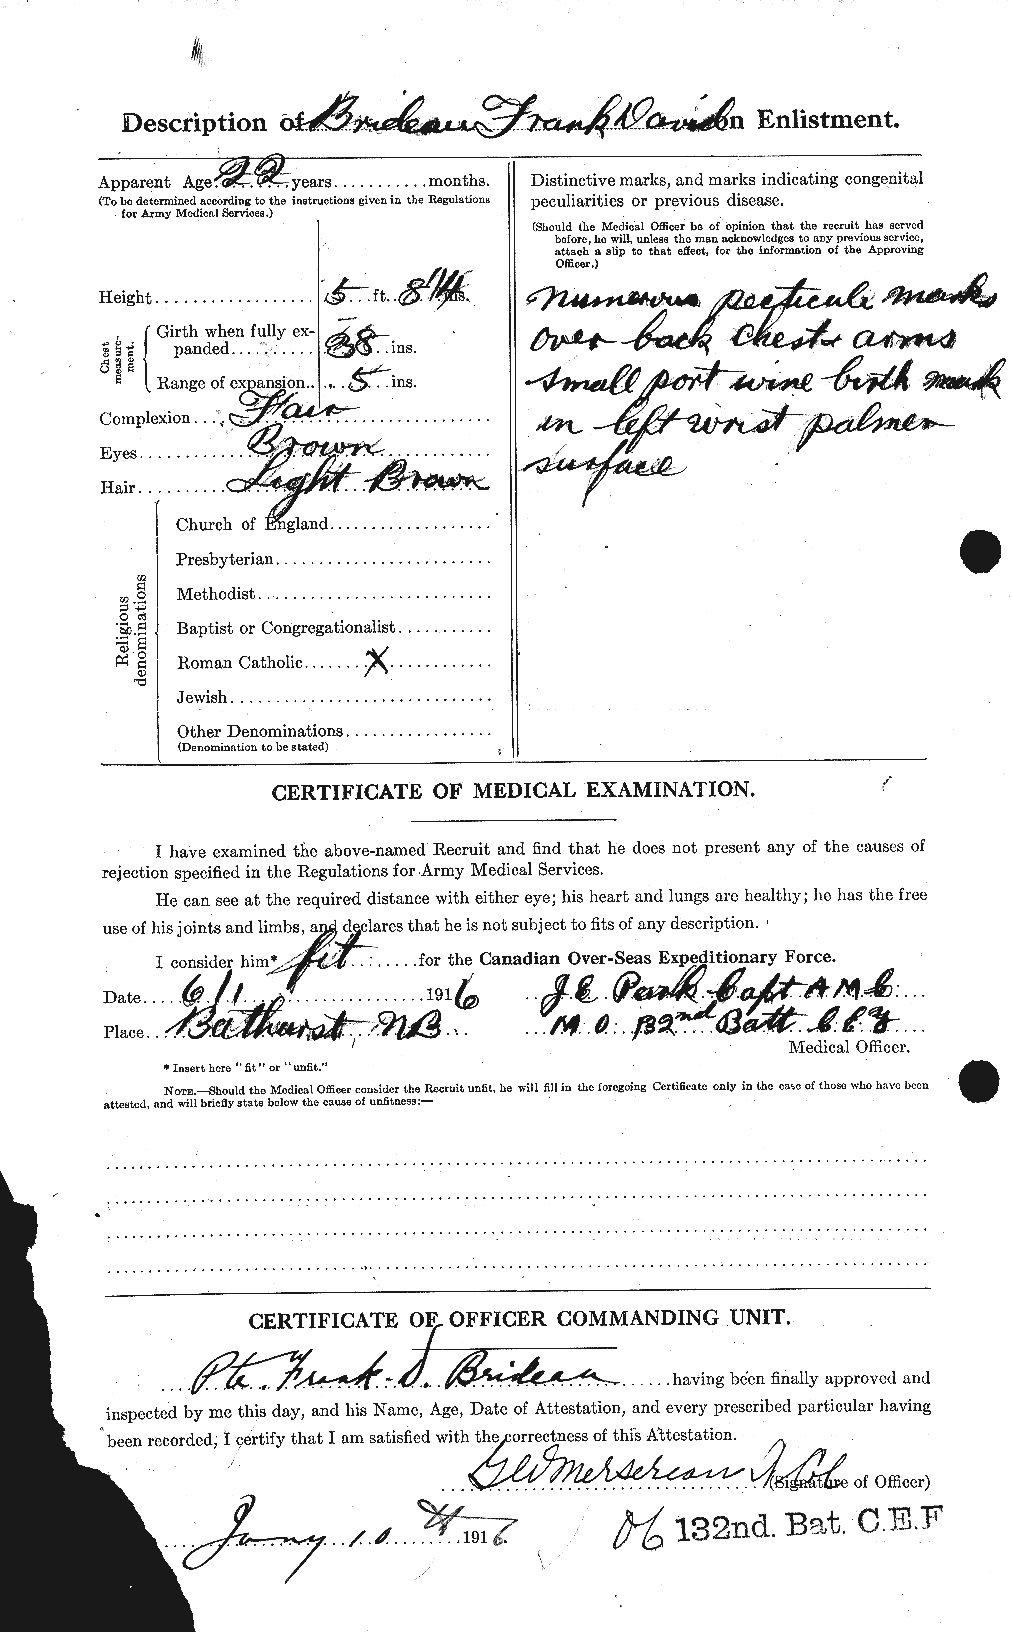 Personnel Records of the First World War - CEF 261259b